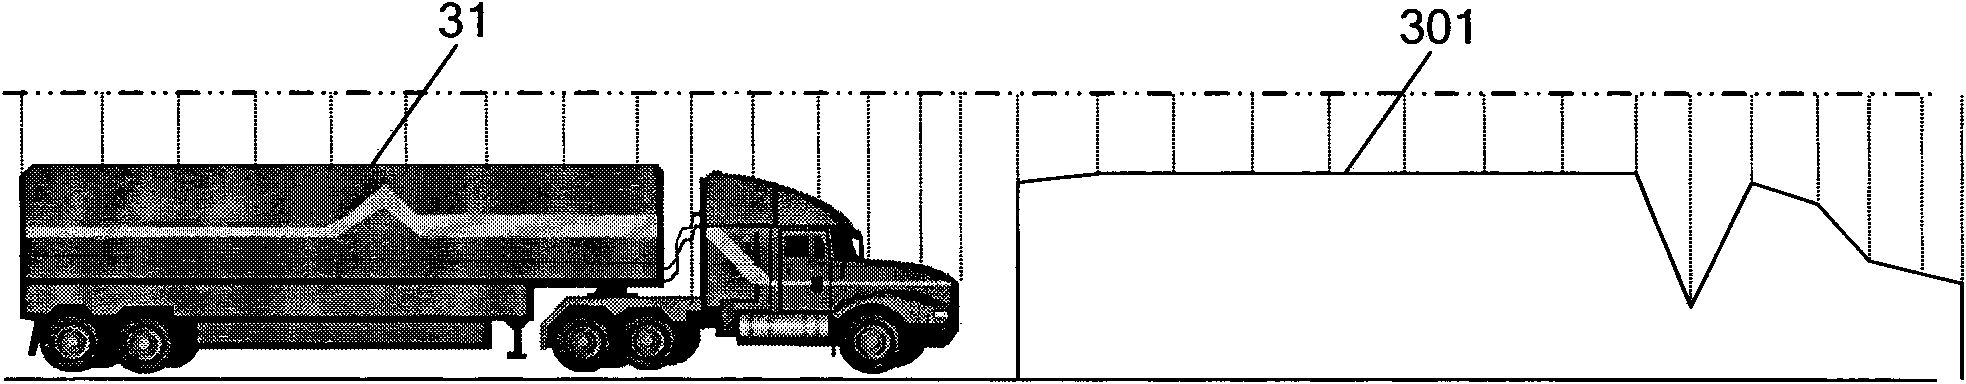 Road vehicle type identification method and system thereof